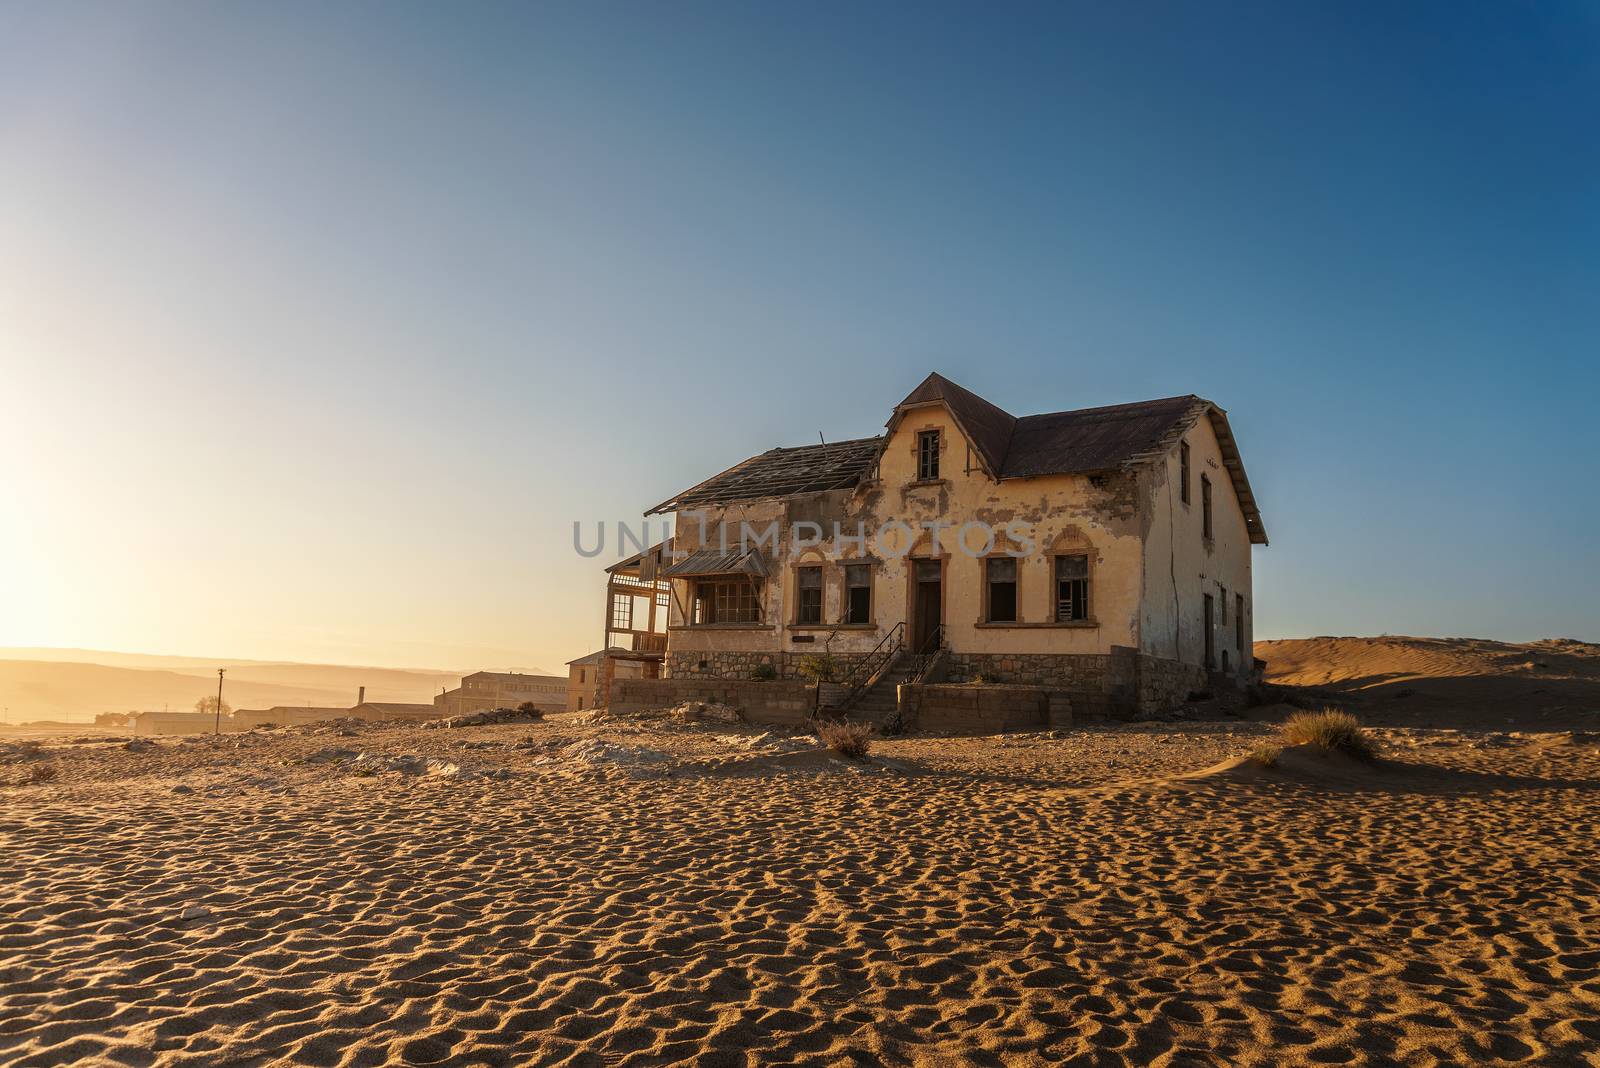 Sunrise above an abandoned house in Kolmanskop ghost town, Namibia by nickfox